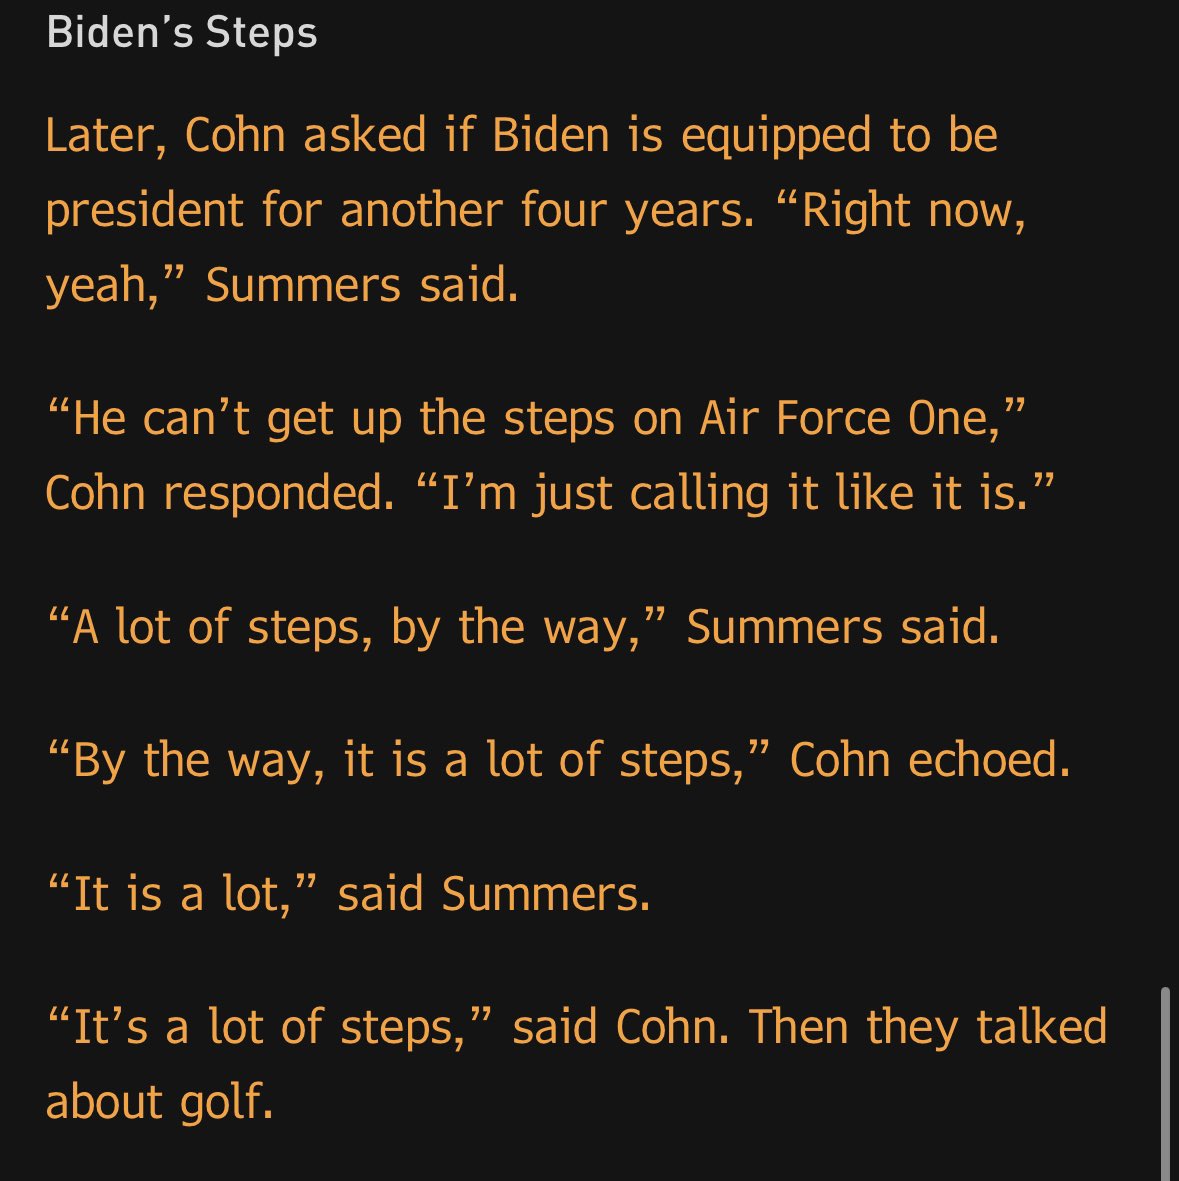 Gary Cohn and Larry Summers agree. There are “a lot of steps” to board Air Force One. via @maxabelson bloomberg.com/news/articles/…